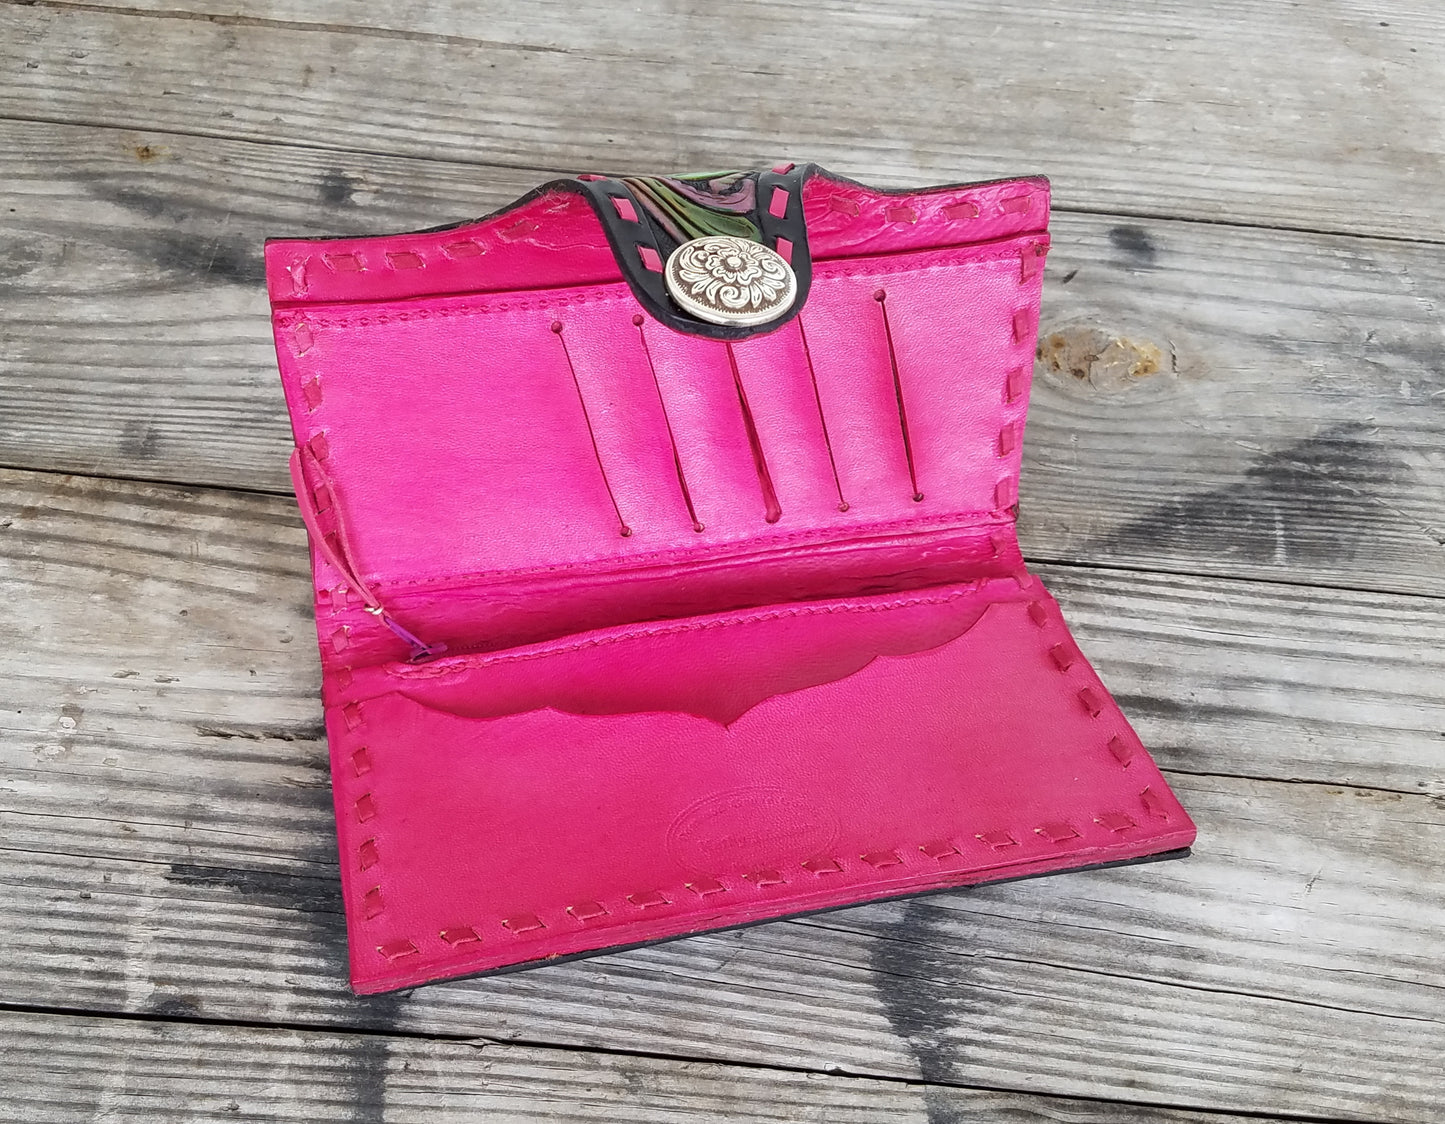 Colorful hand tooled leather clutch wallet